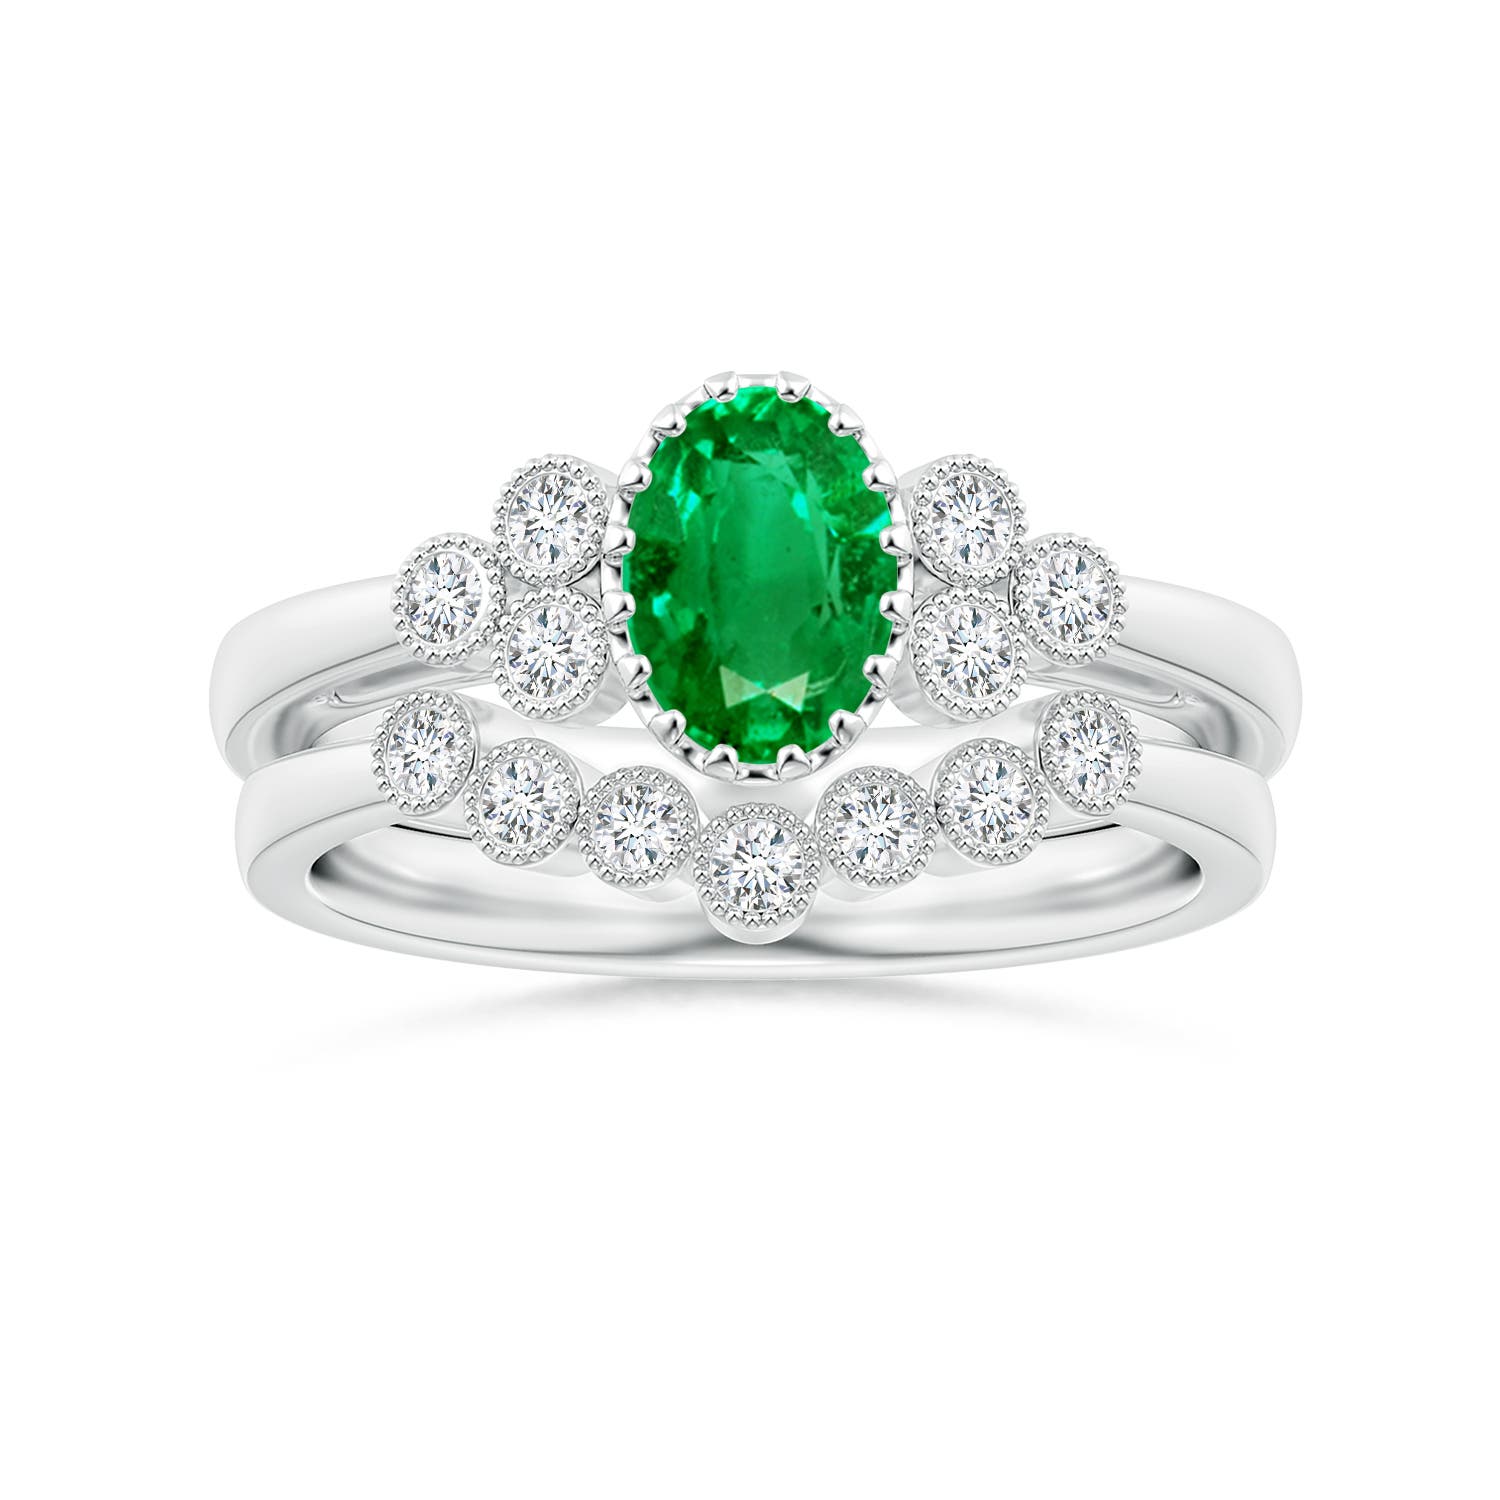 AAA - Emerald / 0.8 CT / 14 KT White Gold